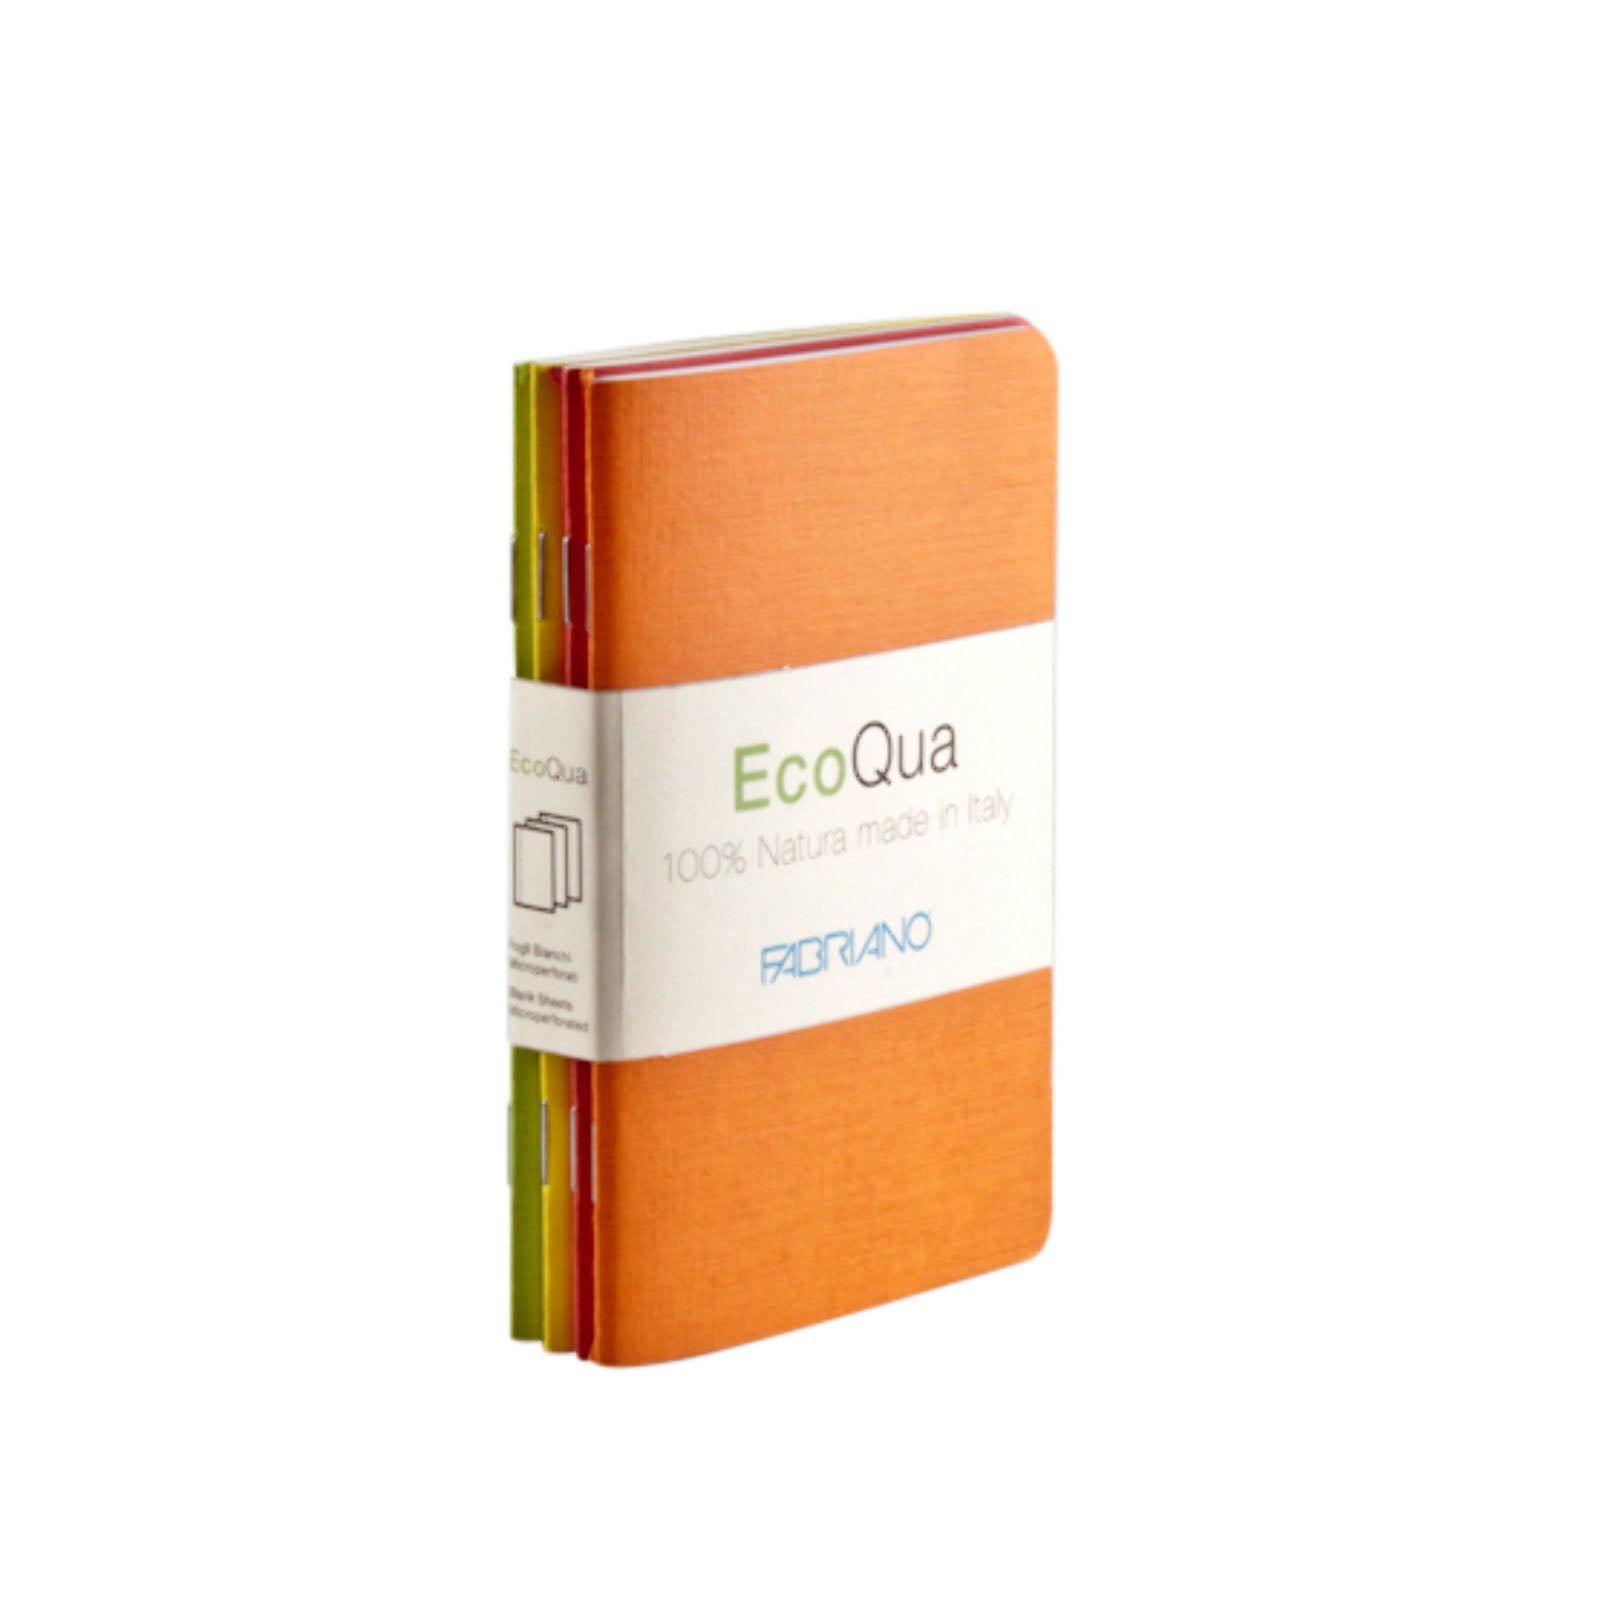 Fabriano EcoQua Pocket Sized Notebooks 4 Pack Dot Warm Color Covers